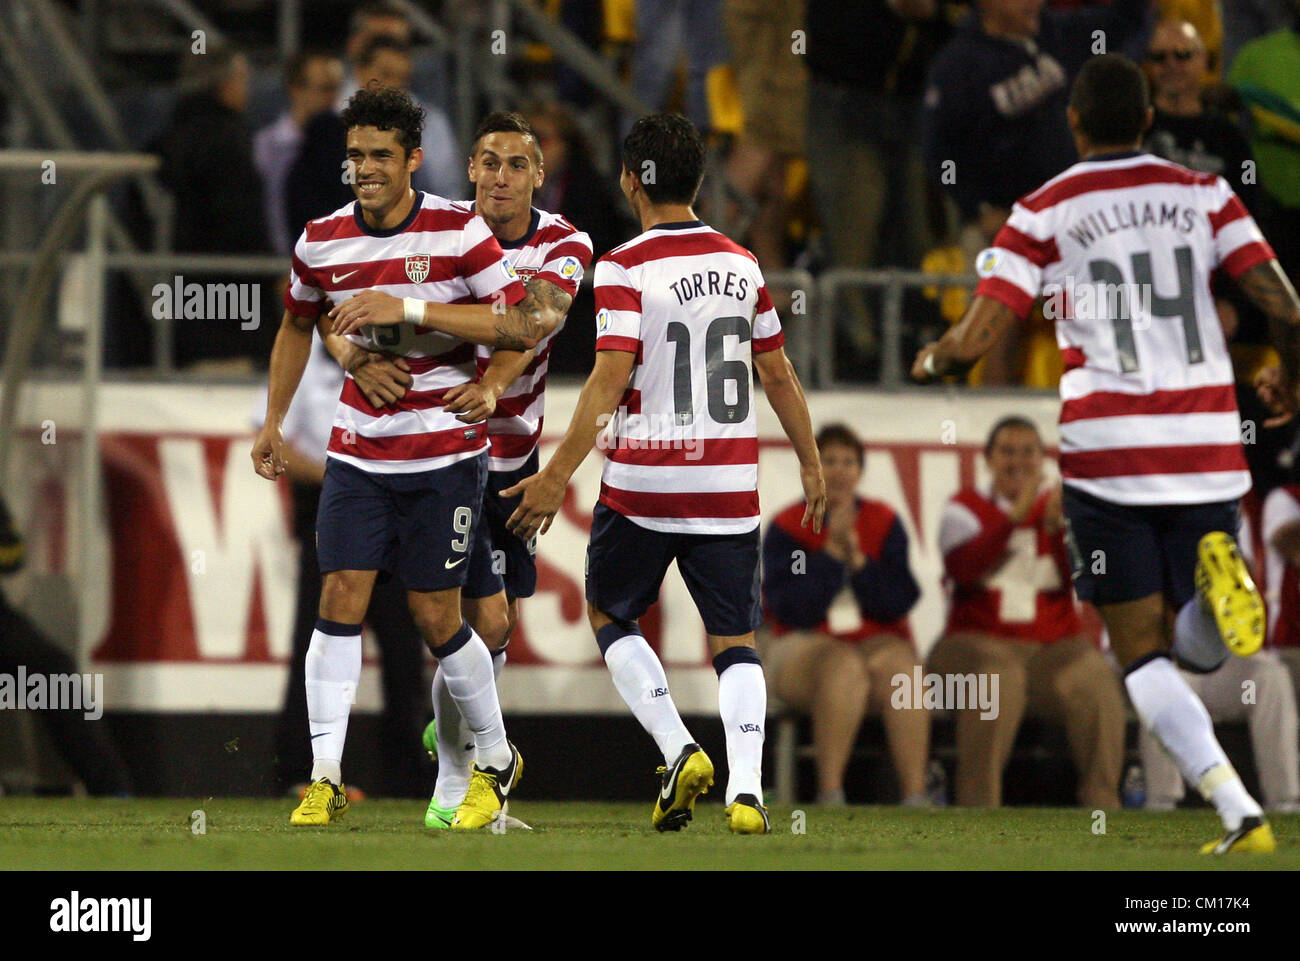 11.09.2012. Columbus, Ohio, USA.  Herculez Gomez (USA) (9) celebrates his goal with Geoff Cameron (USA) (behind), Jose Francisco Torres (USA) (16) and Danny Williams (USA) (14). The United States Men's National Team defeated the Jamaica Men's National Team 1-0 at Columbus Crew Stadium in Columbus, Ohio in a CONCACAF Third Round World Cup Qualifying match for the FIFA 2014 Brazil World Cup. Stock Photo